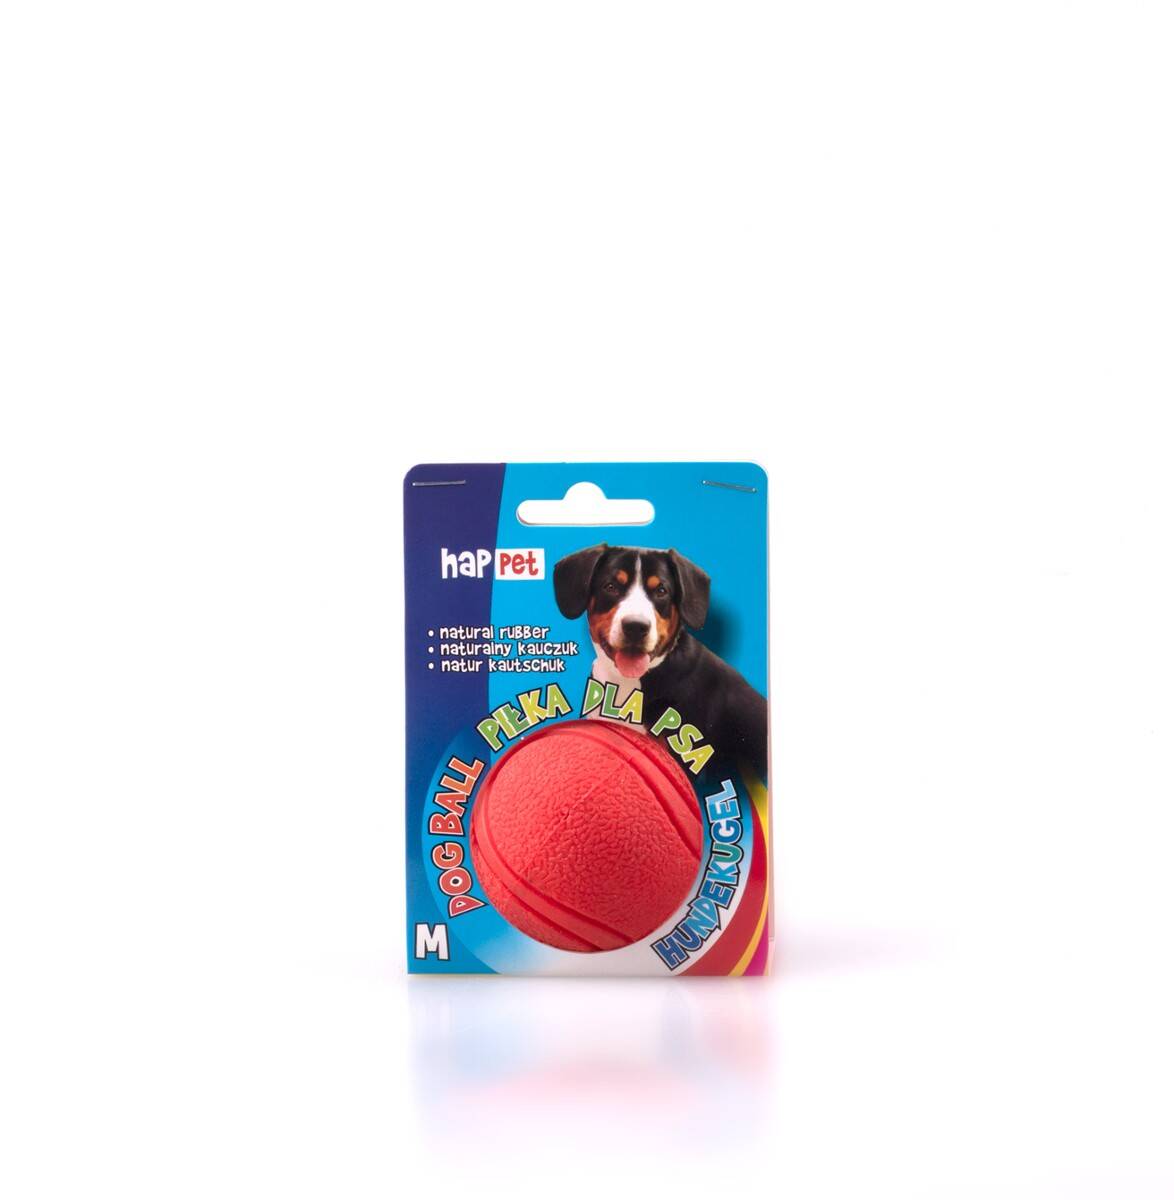 Rubber ball for a dog 60mm